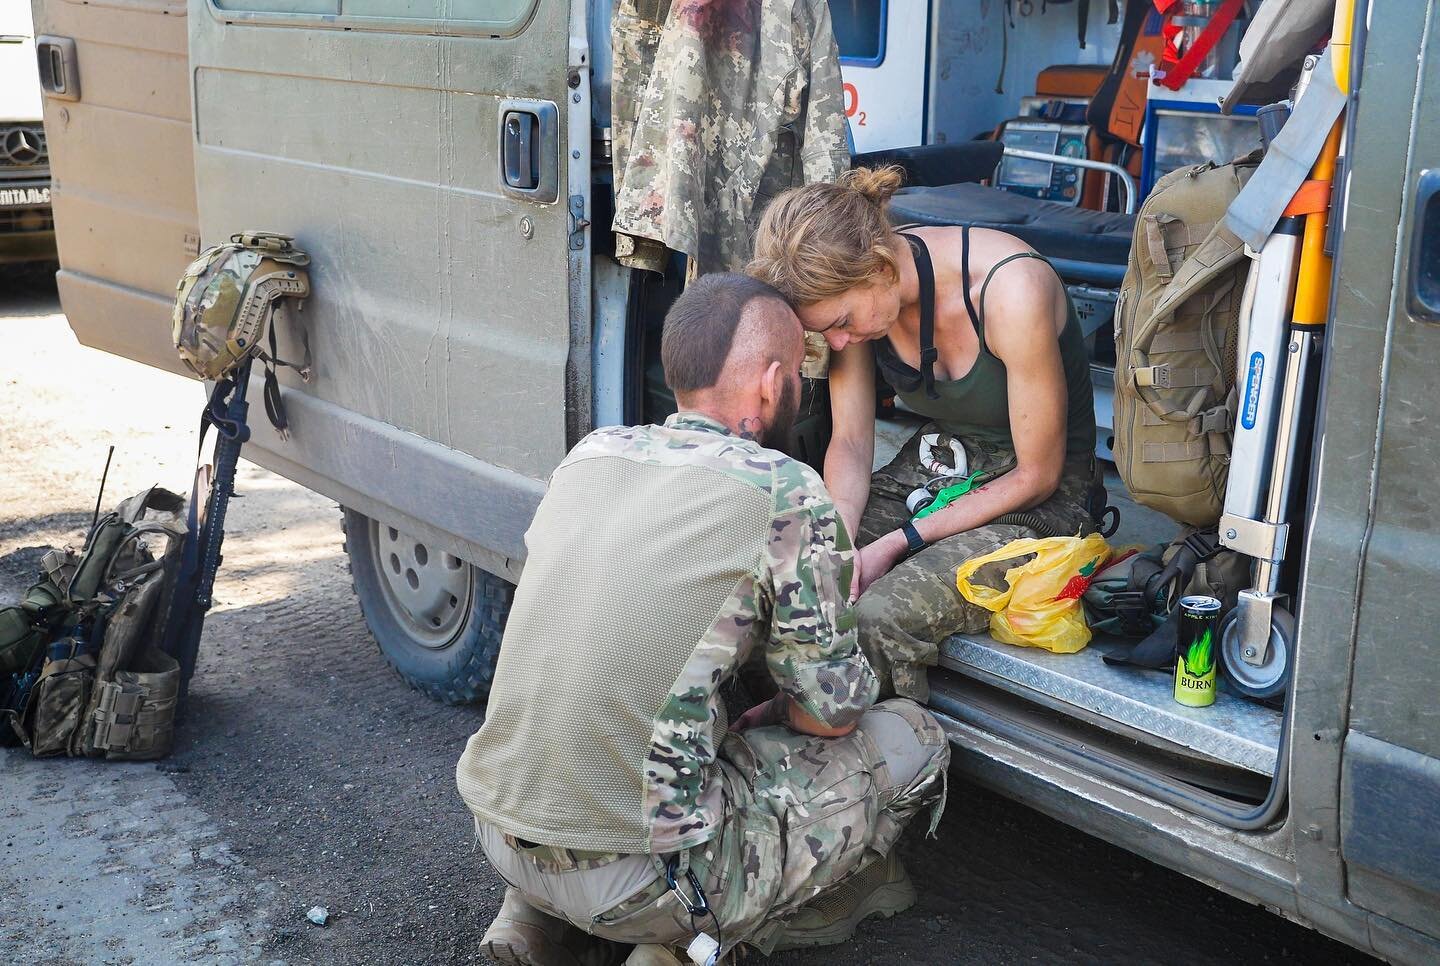 Medics Rebekah and Oleg rest after a long day evacuating Ukrainian soldiers from the frontline. Three of their teammates lost their lives doing the same. 
 
For a glimpse into a day in the life of combat medics supporting the Ukrainian counteroffensi